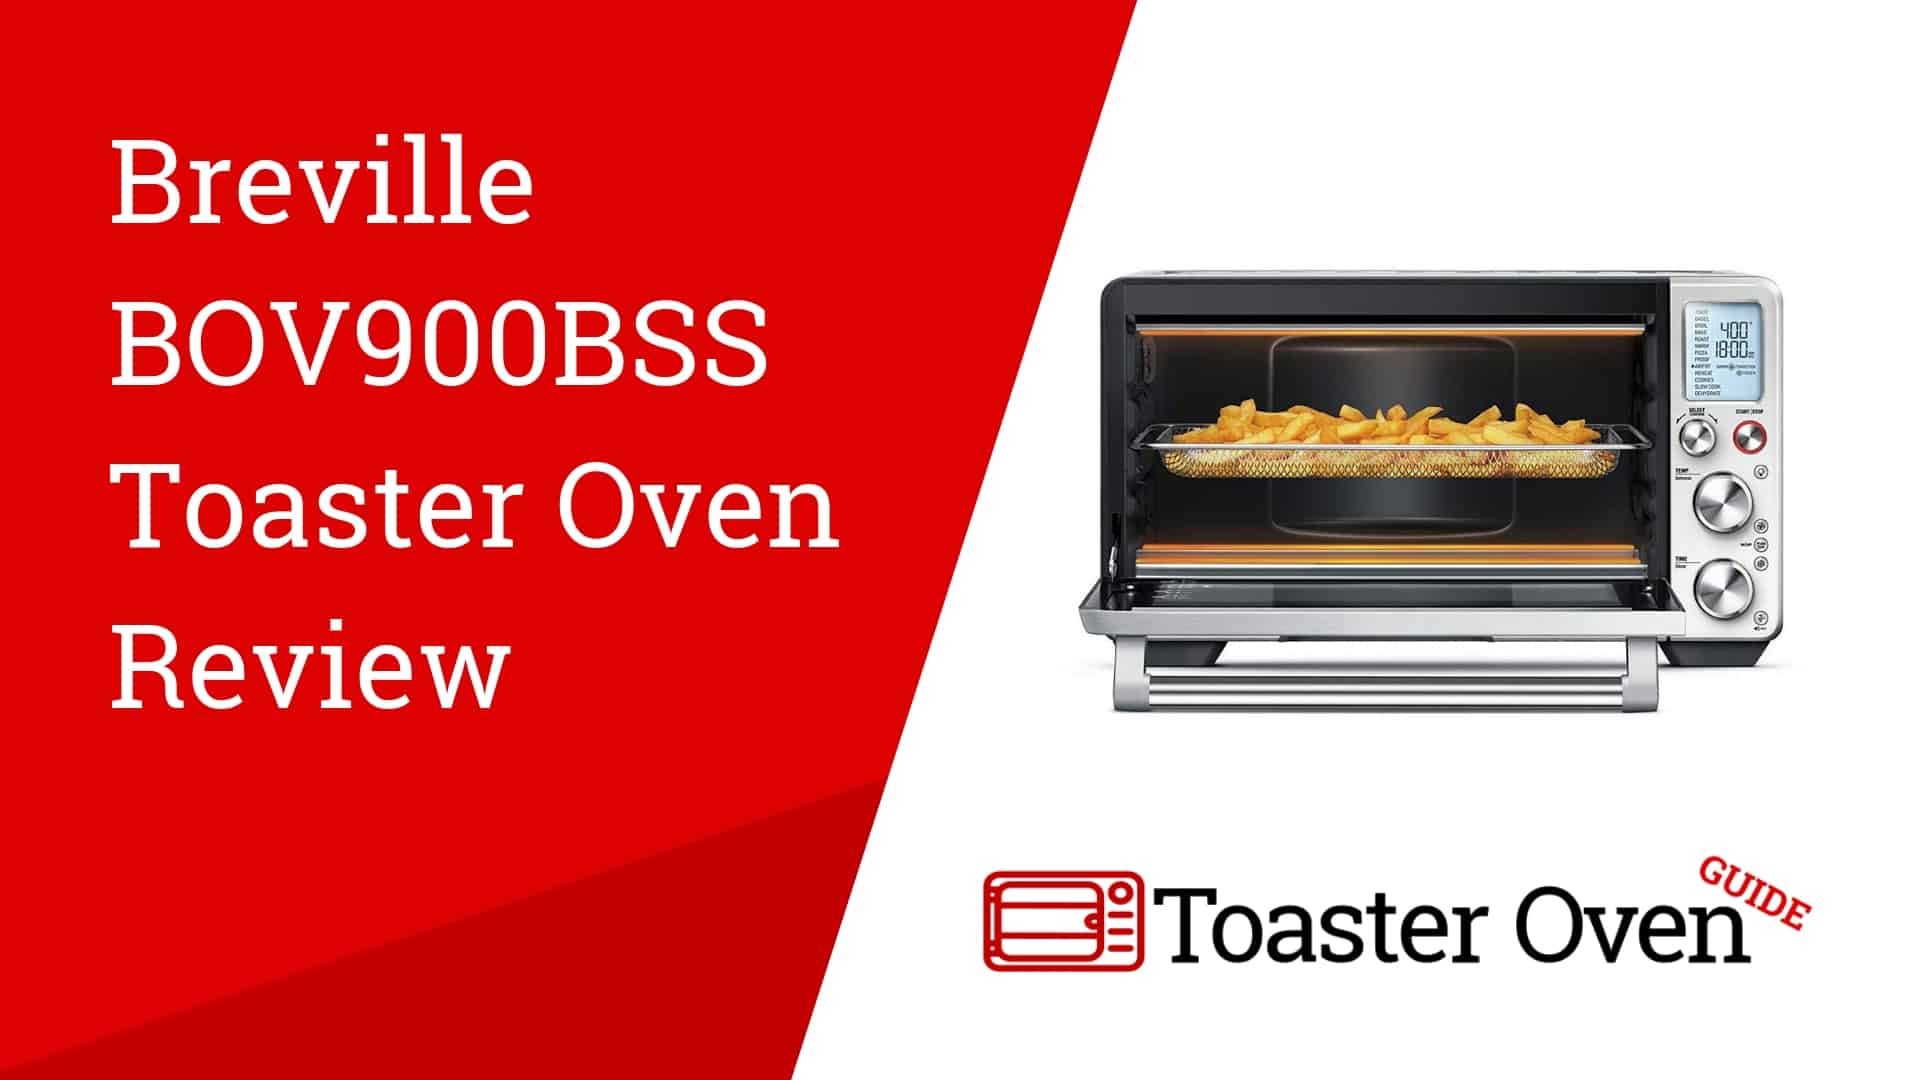 Breville Smart Oven Air Fryer BOV900BSS Toaster Oven Stainless